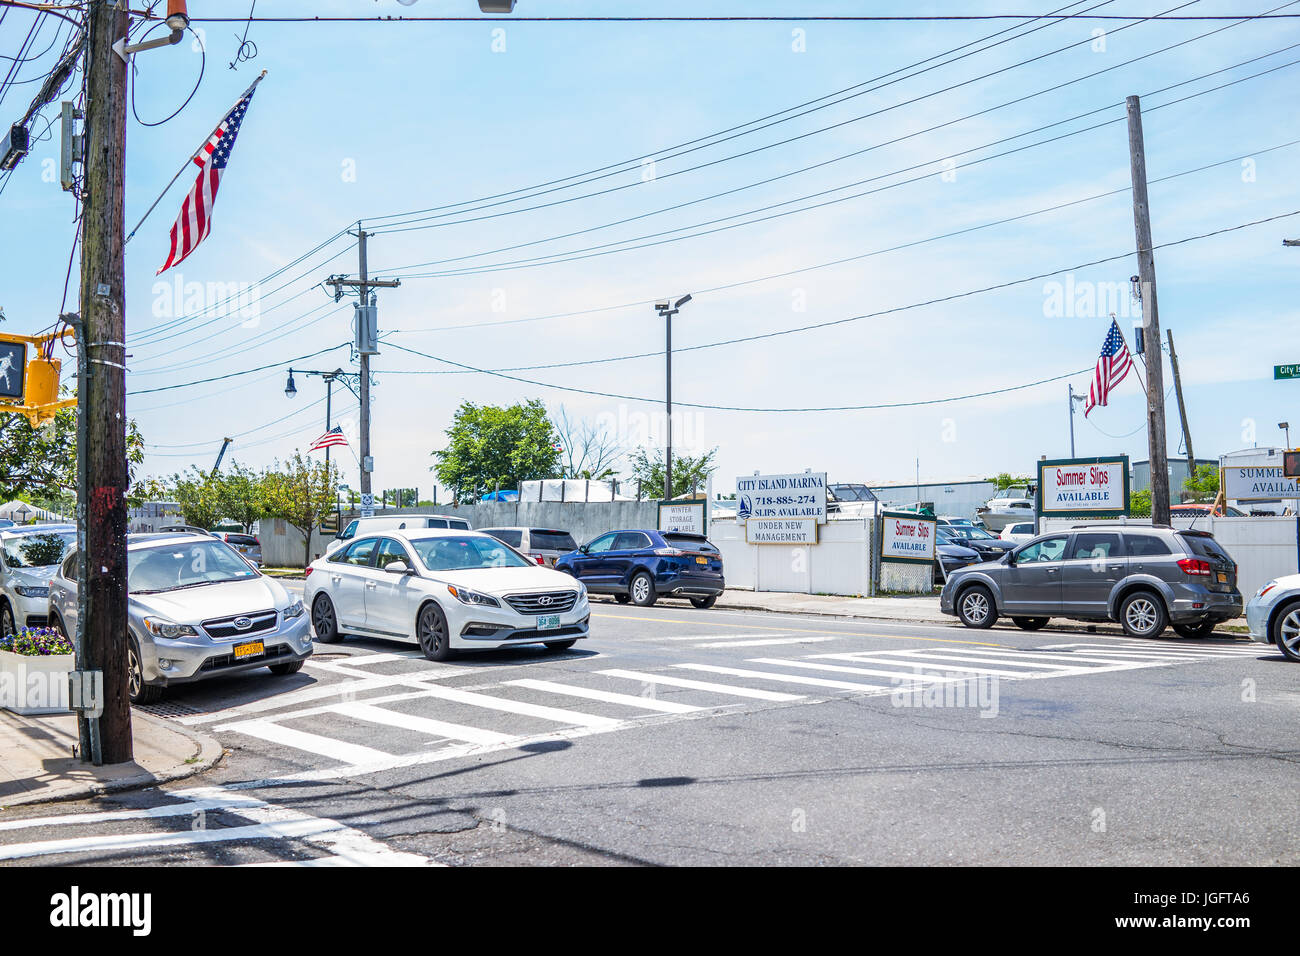 Bronx, USA - June 11, 2017: City Island road with signs of marina and harbor with American flags Stock Photo